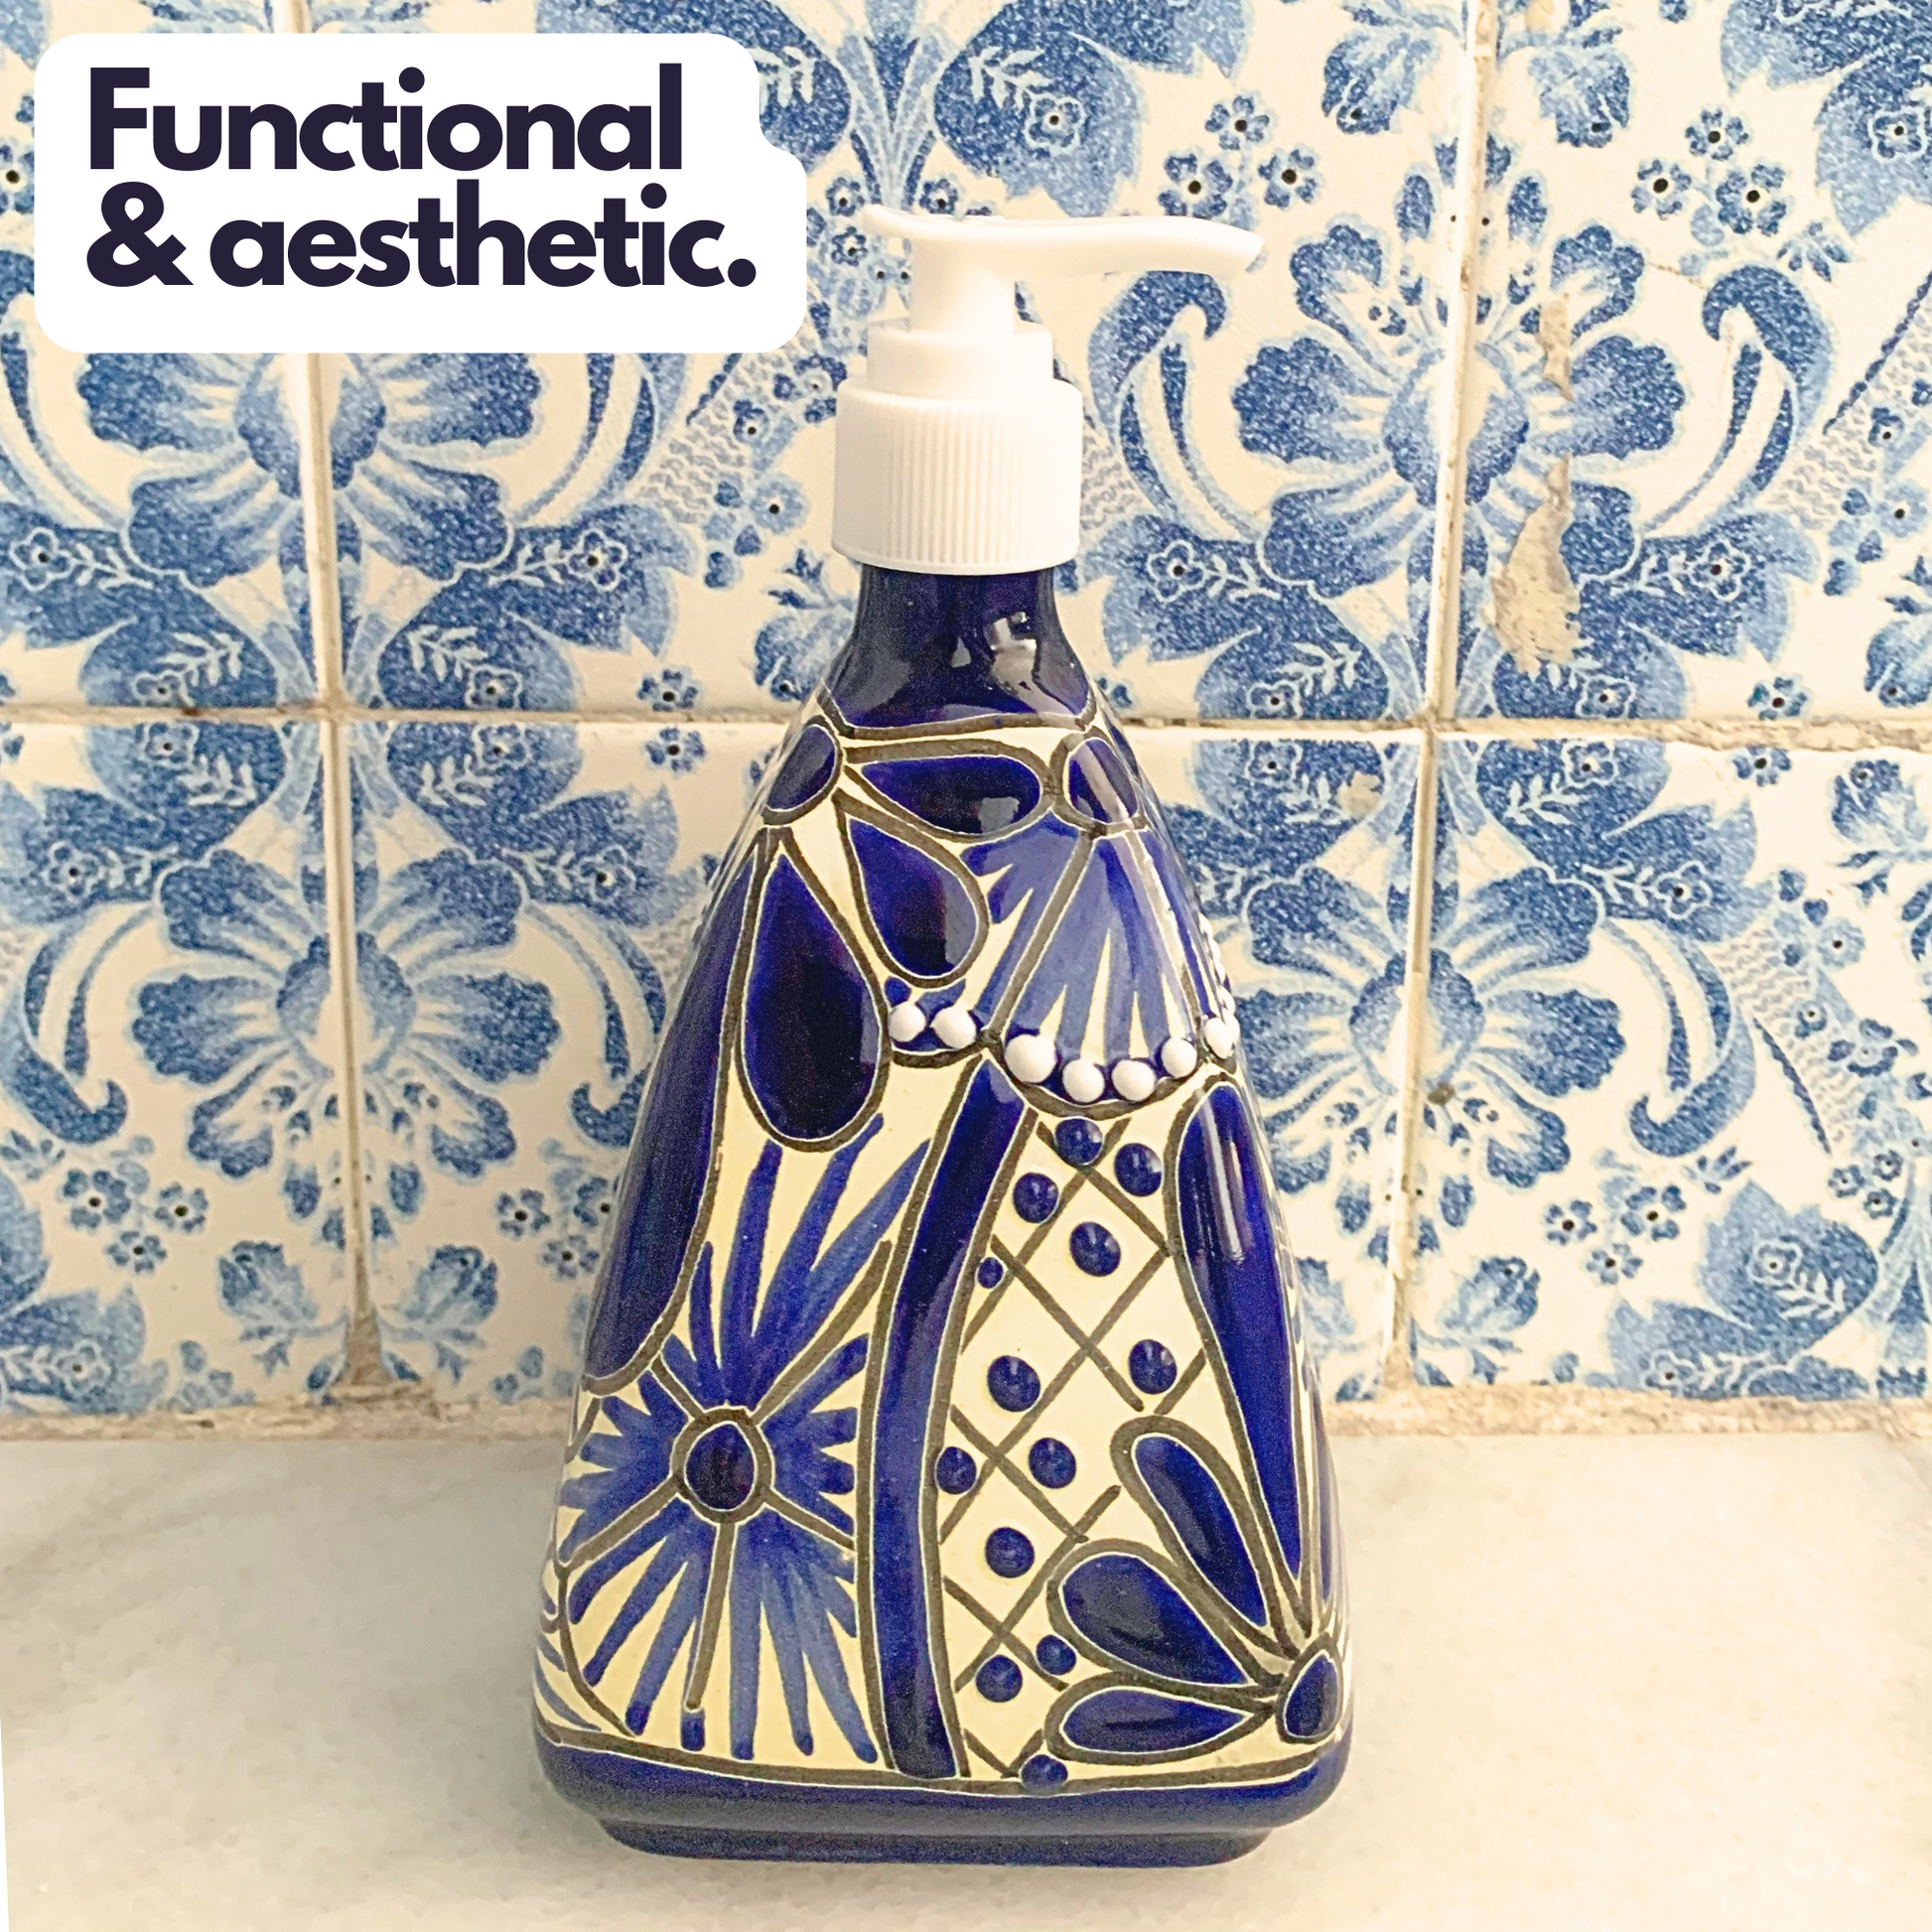 An eye-catching, hand-painted, Refillable Ceramic Soap Dispenser, skillfully crafted in Mexico. Perfect for adding a vibrant touch to any kitchen or bathroom placed on a sink